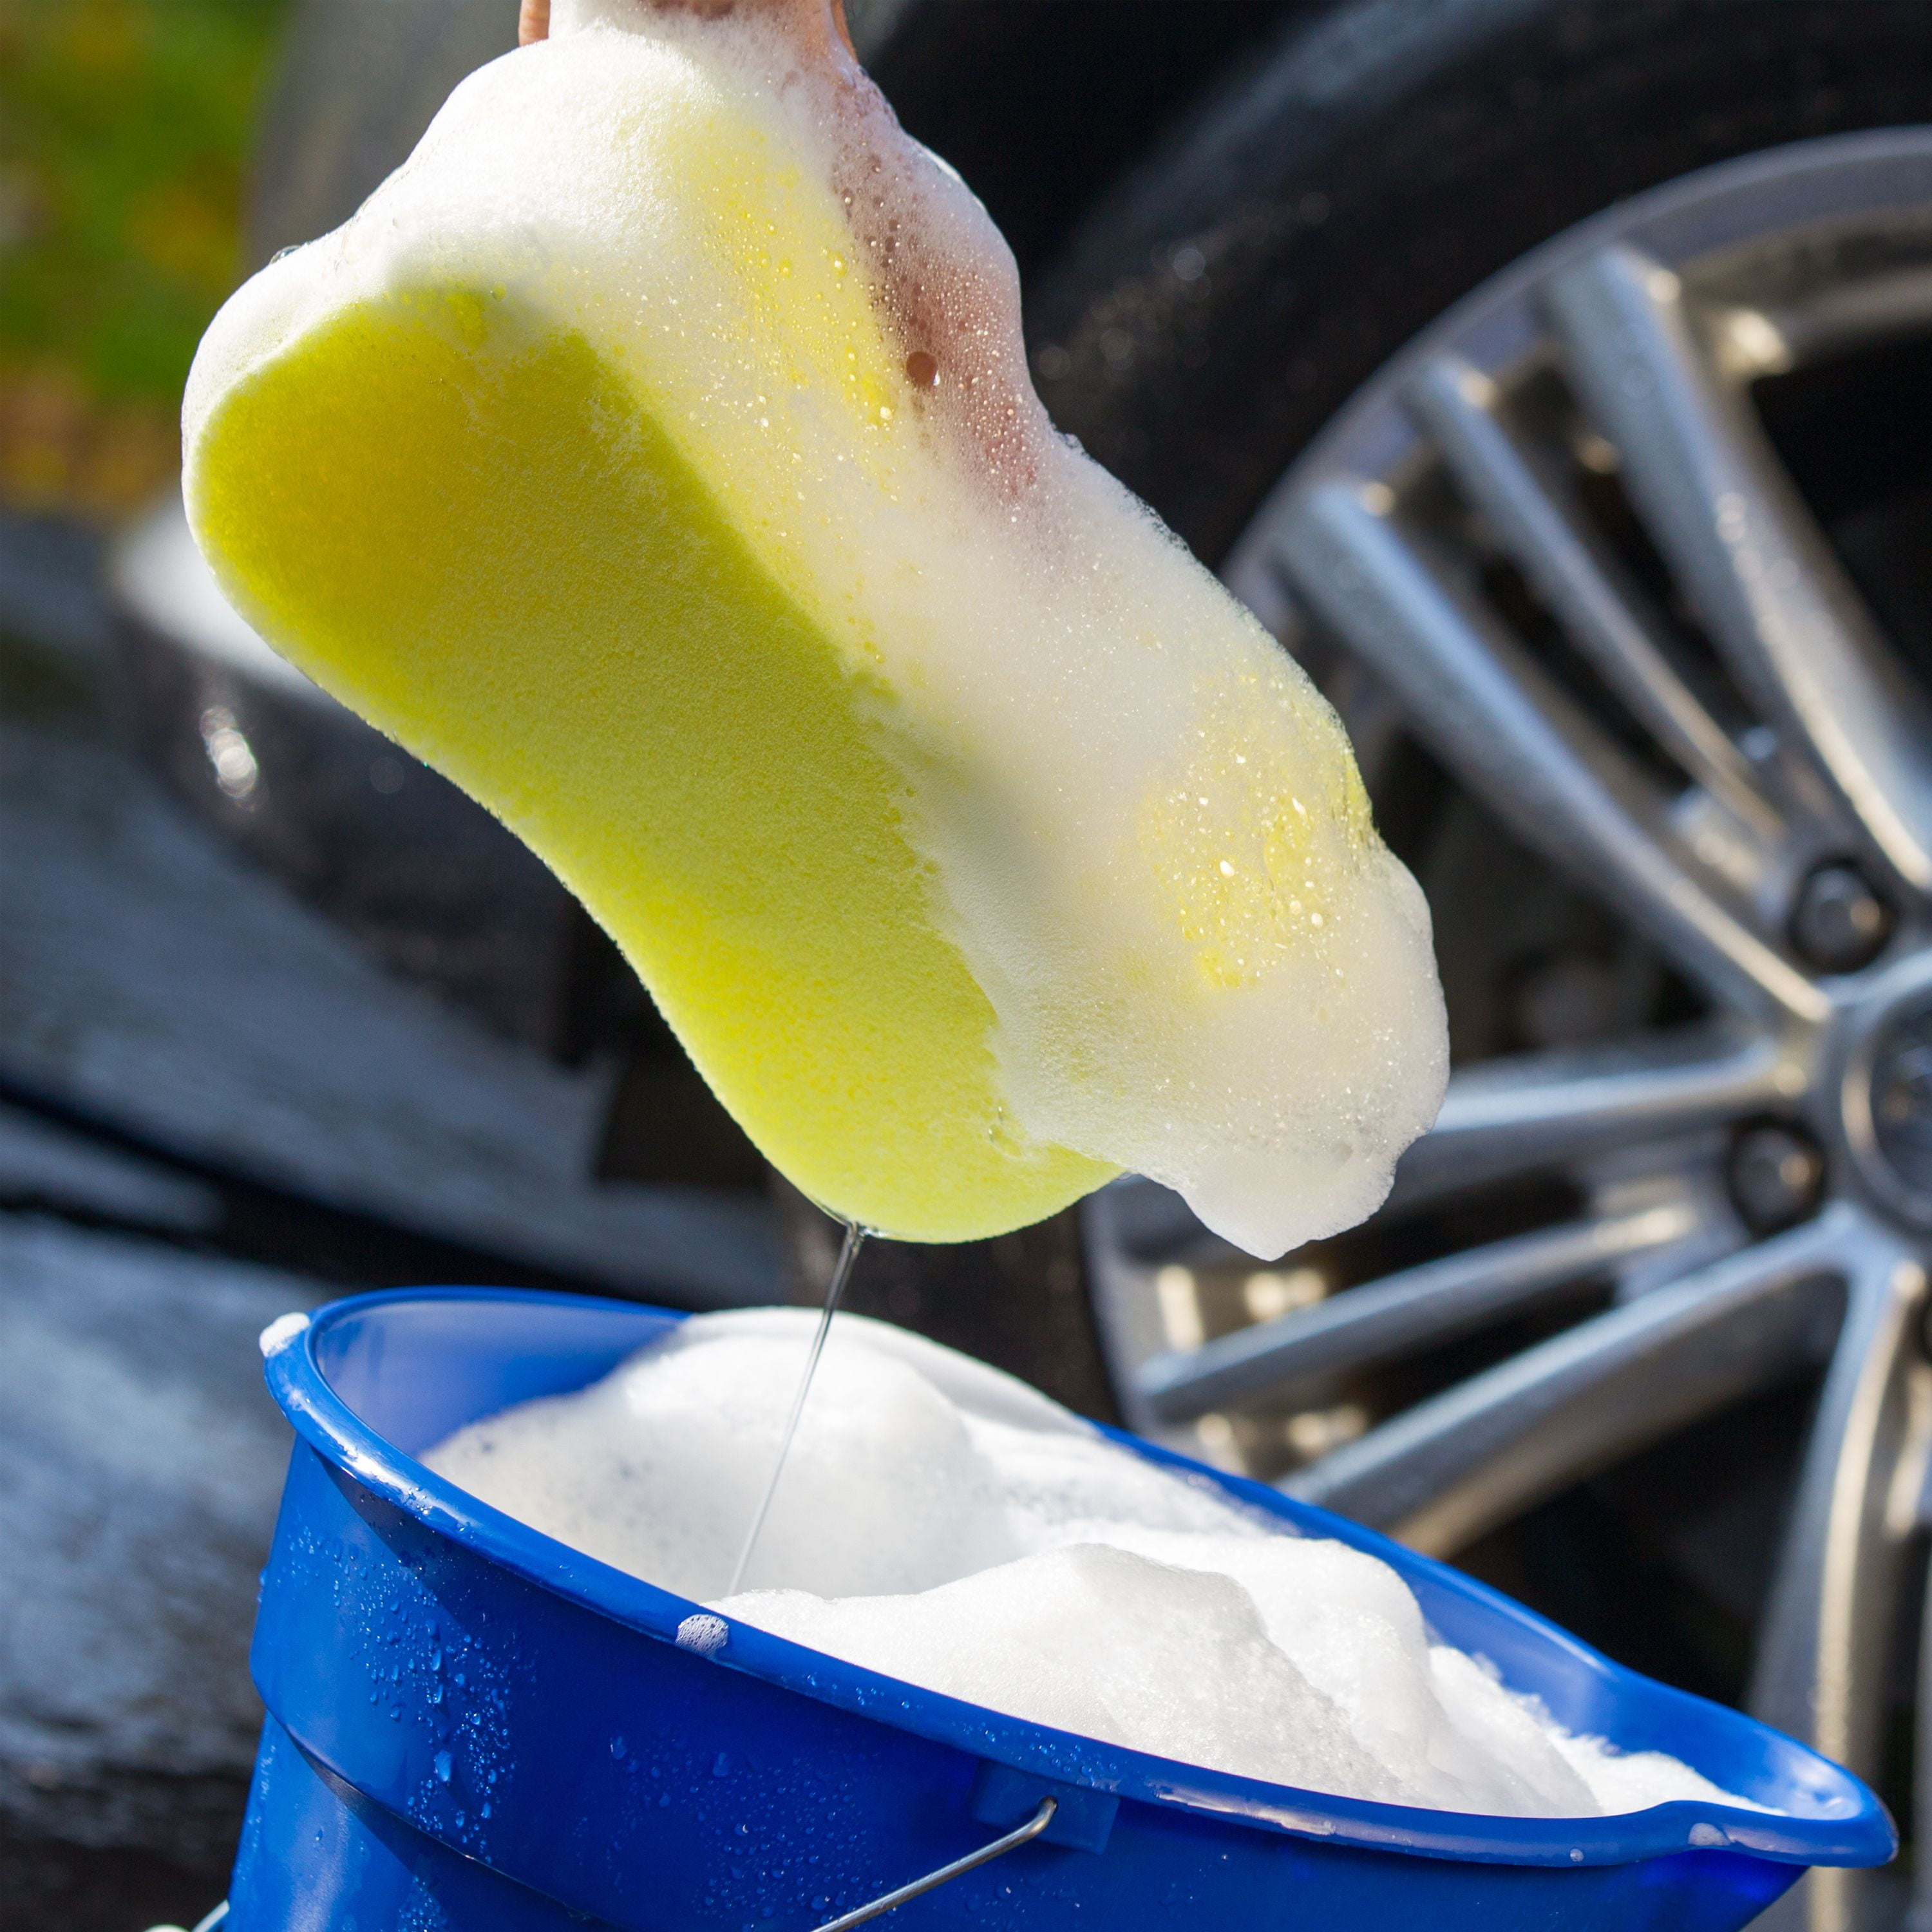 Car Wash Sponge Giant To Choose Easy Grip To Wash Car Bike Motorcycle Boat  And Home From Blake Online, $1.34